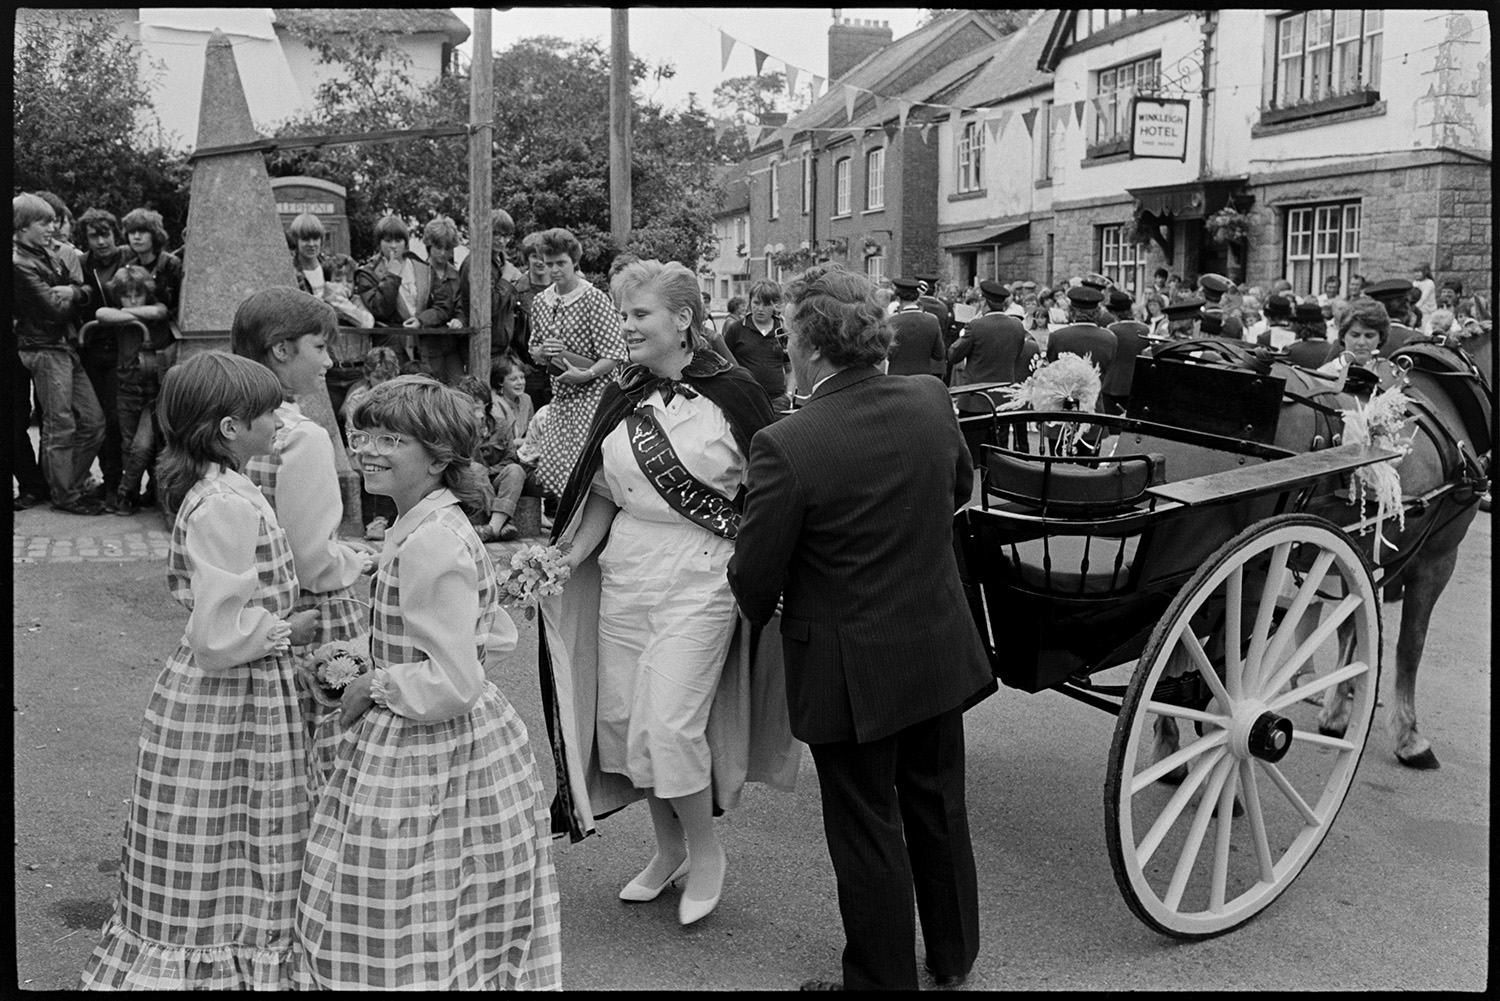 Fair Queen arriving in village in pony trap. 
[The Winkleigh Fair Queen arriving in Winkleigh Square for the start of the Fair in a horse drawn open carriage. She is getting out of the carriage with her attendants. A crowd of people are watching and the street is decorated with bunting. The Winkleigh Hotel is visible in the background.]